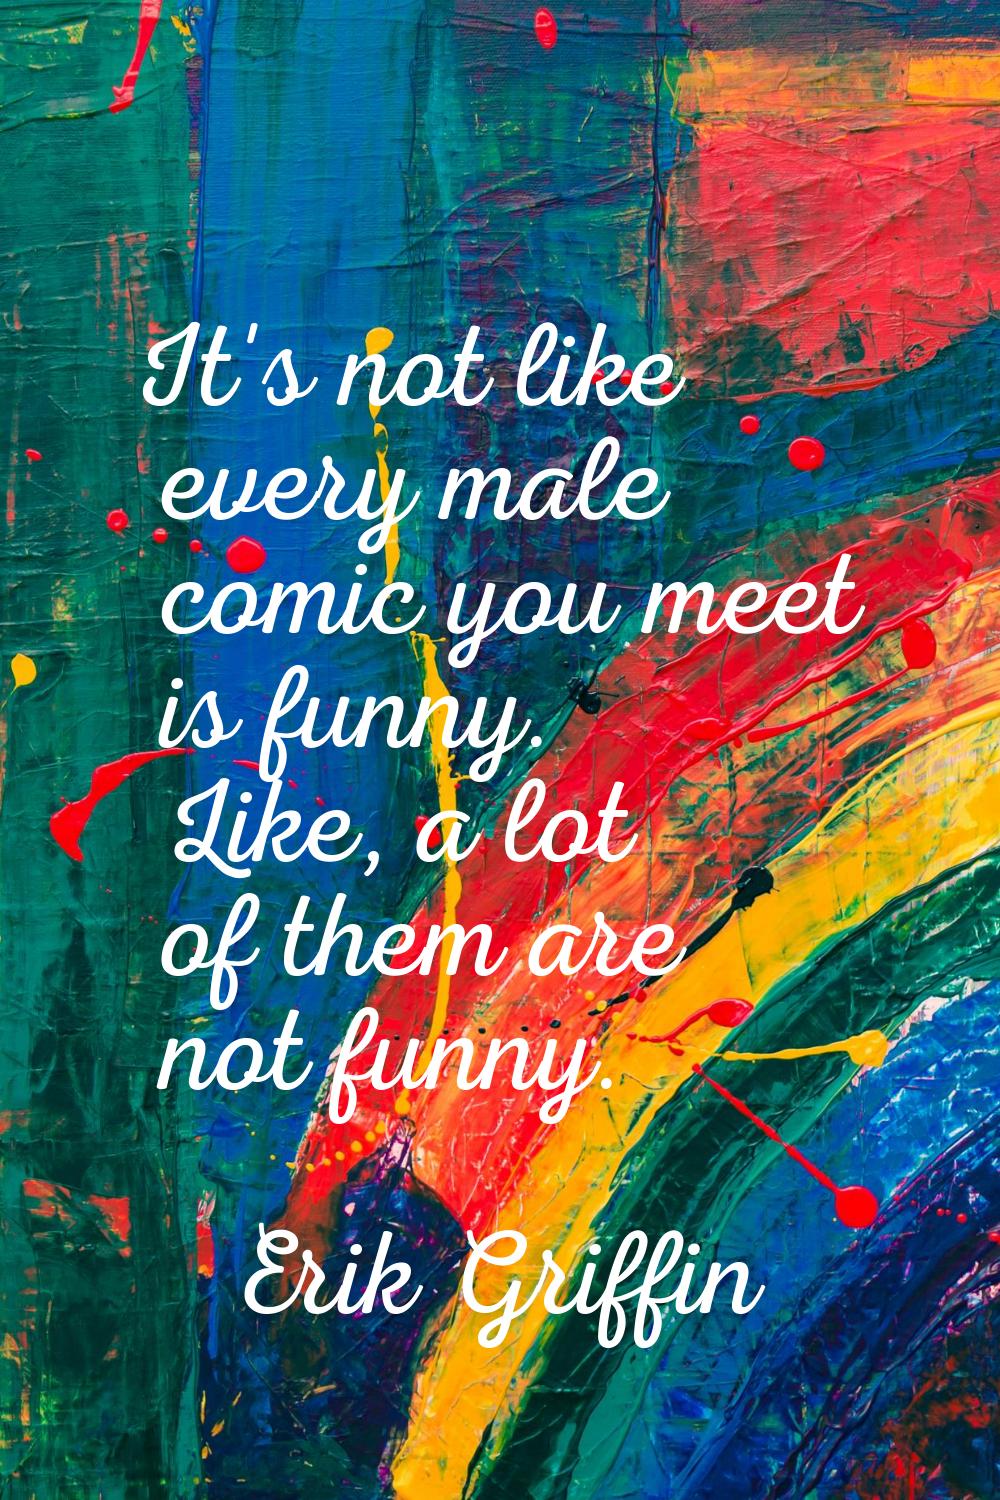 It's not like every male comic you meet is funny. Like, a lot of them are not funny.